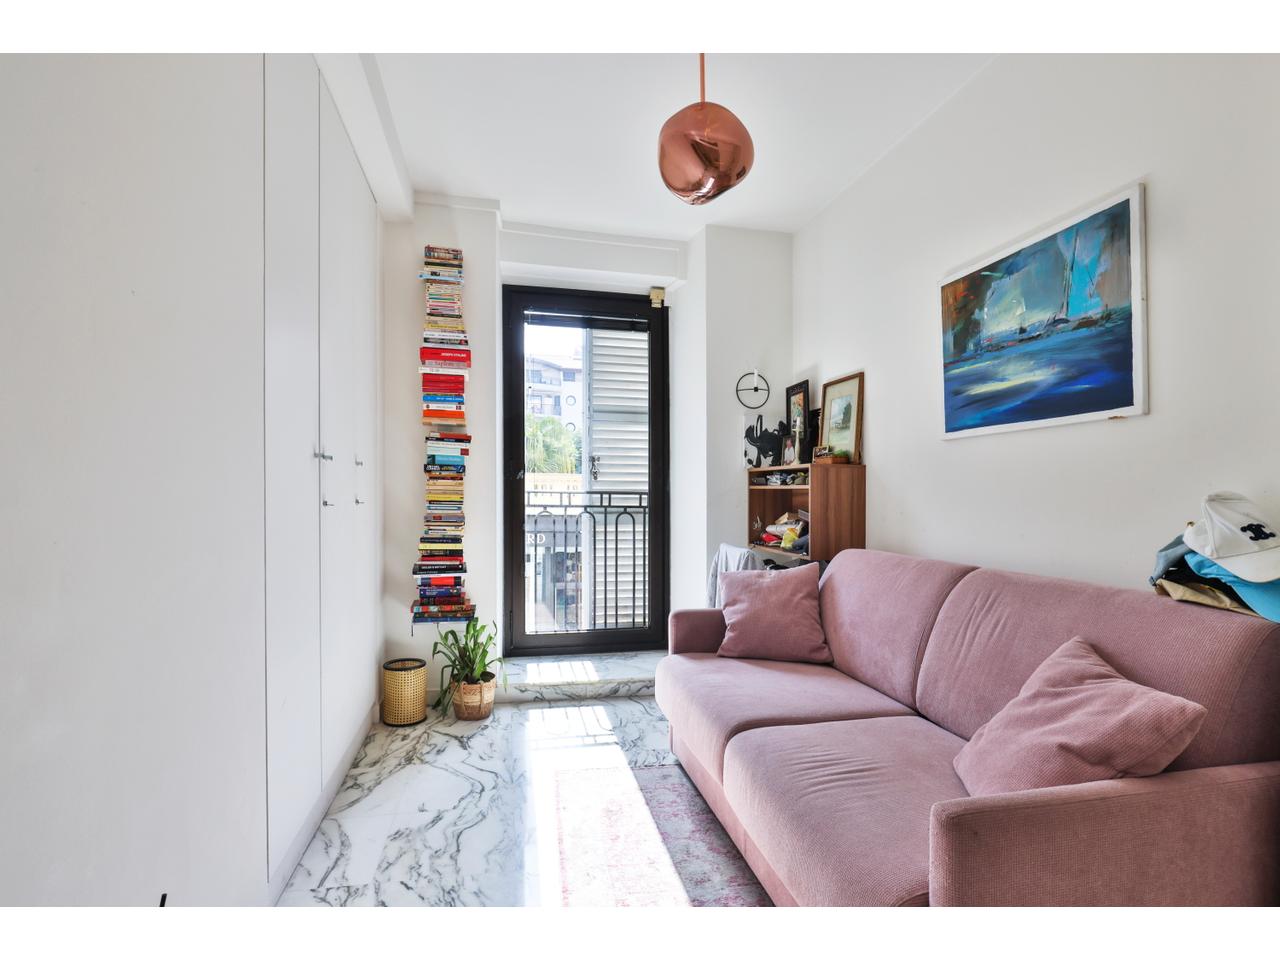 Nice Riviera - Real estate agency Nice Côte d'Azur | Appartement  3 Rooms 86.21m2  for sale  1 140 000 €